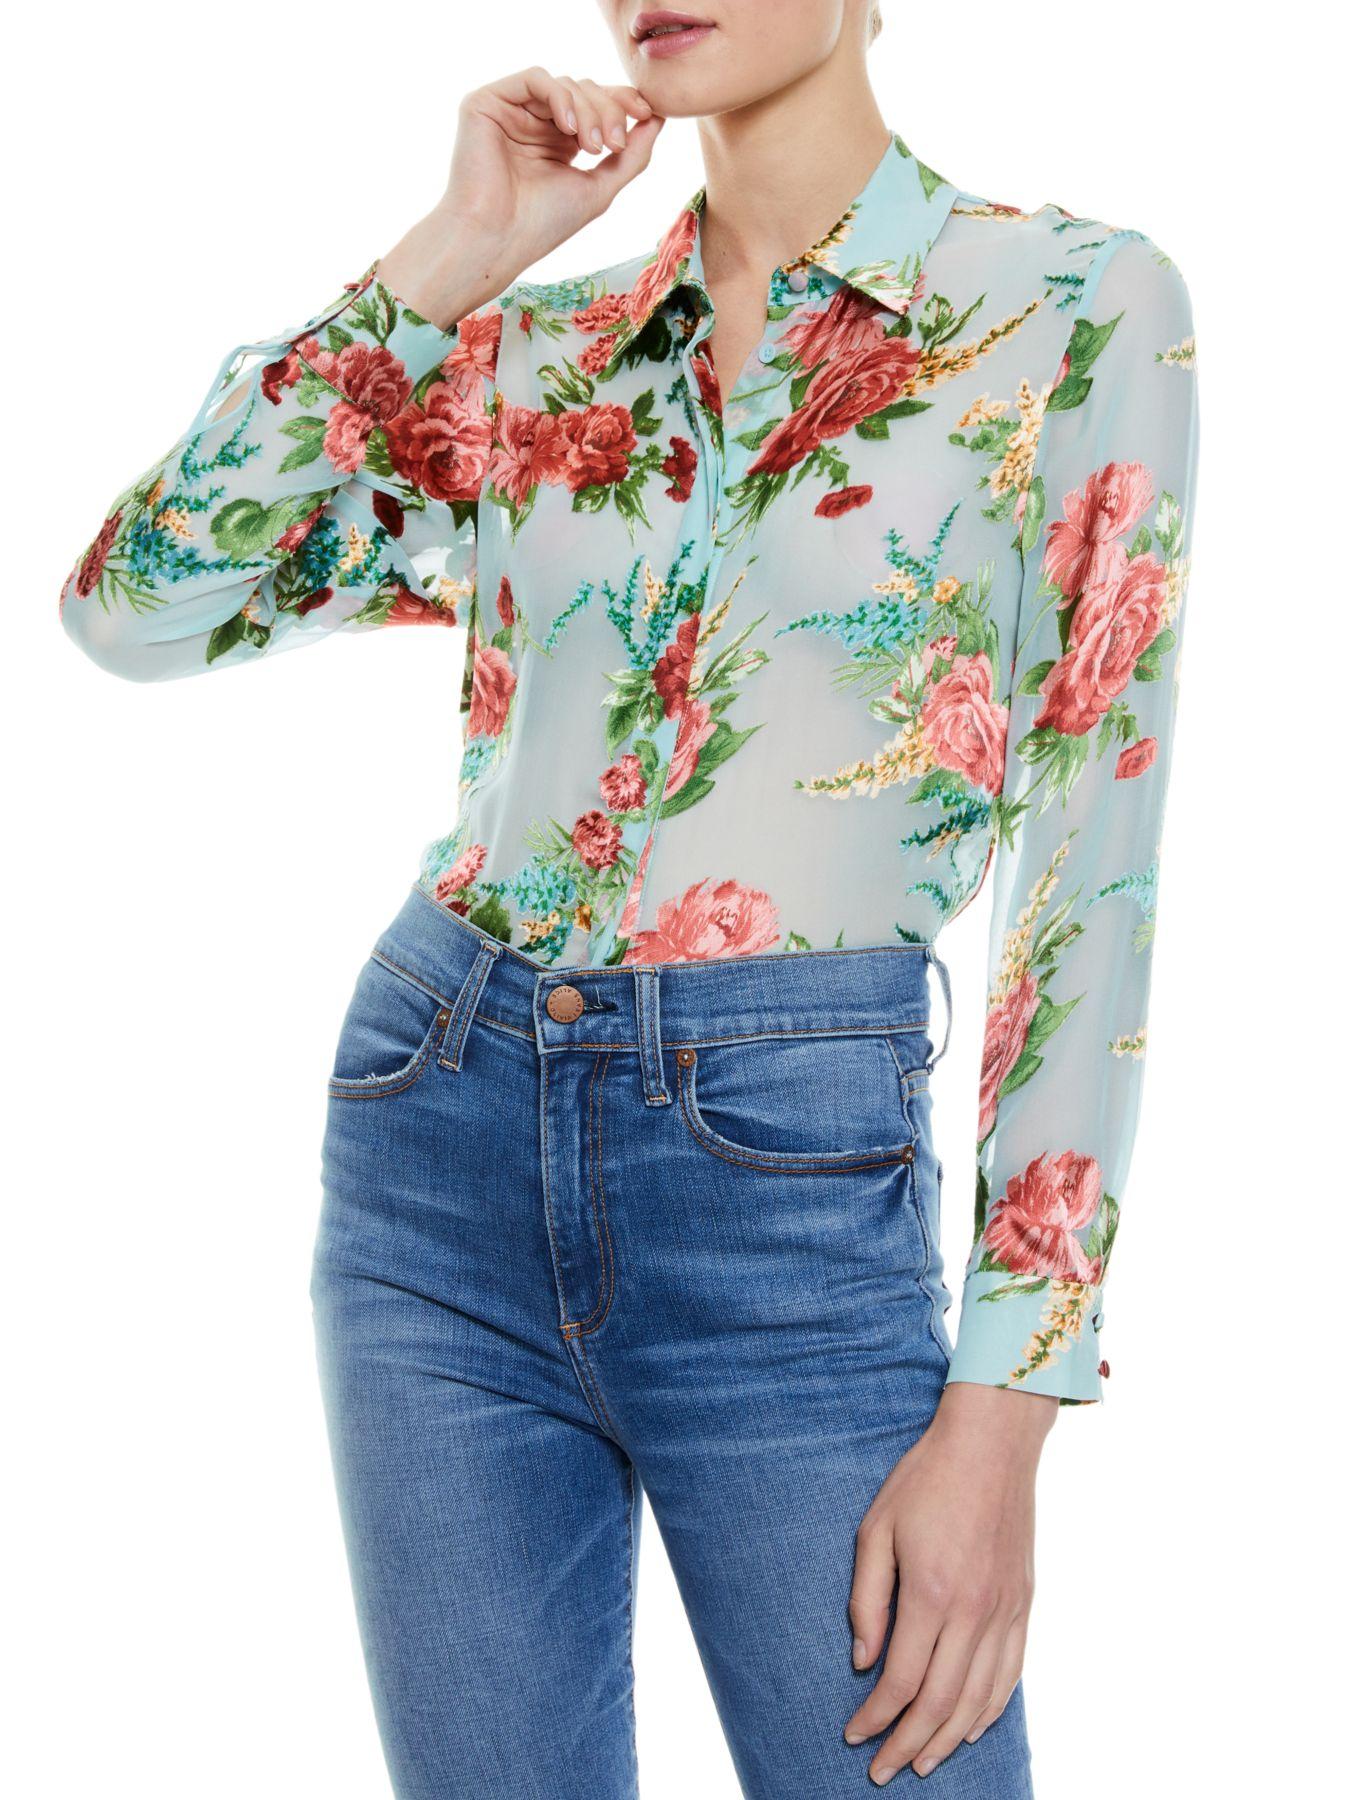 Alice + Olivia Willa Floral Silk Blouse in Blue - Lyst